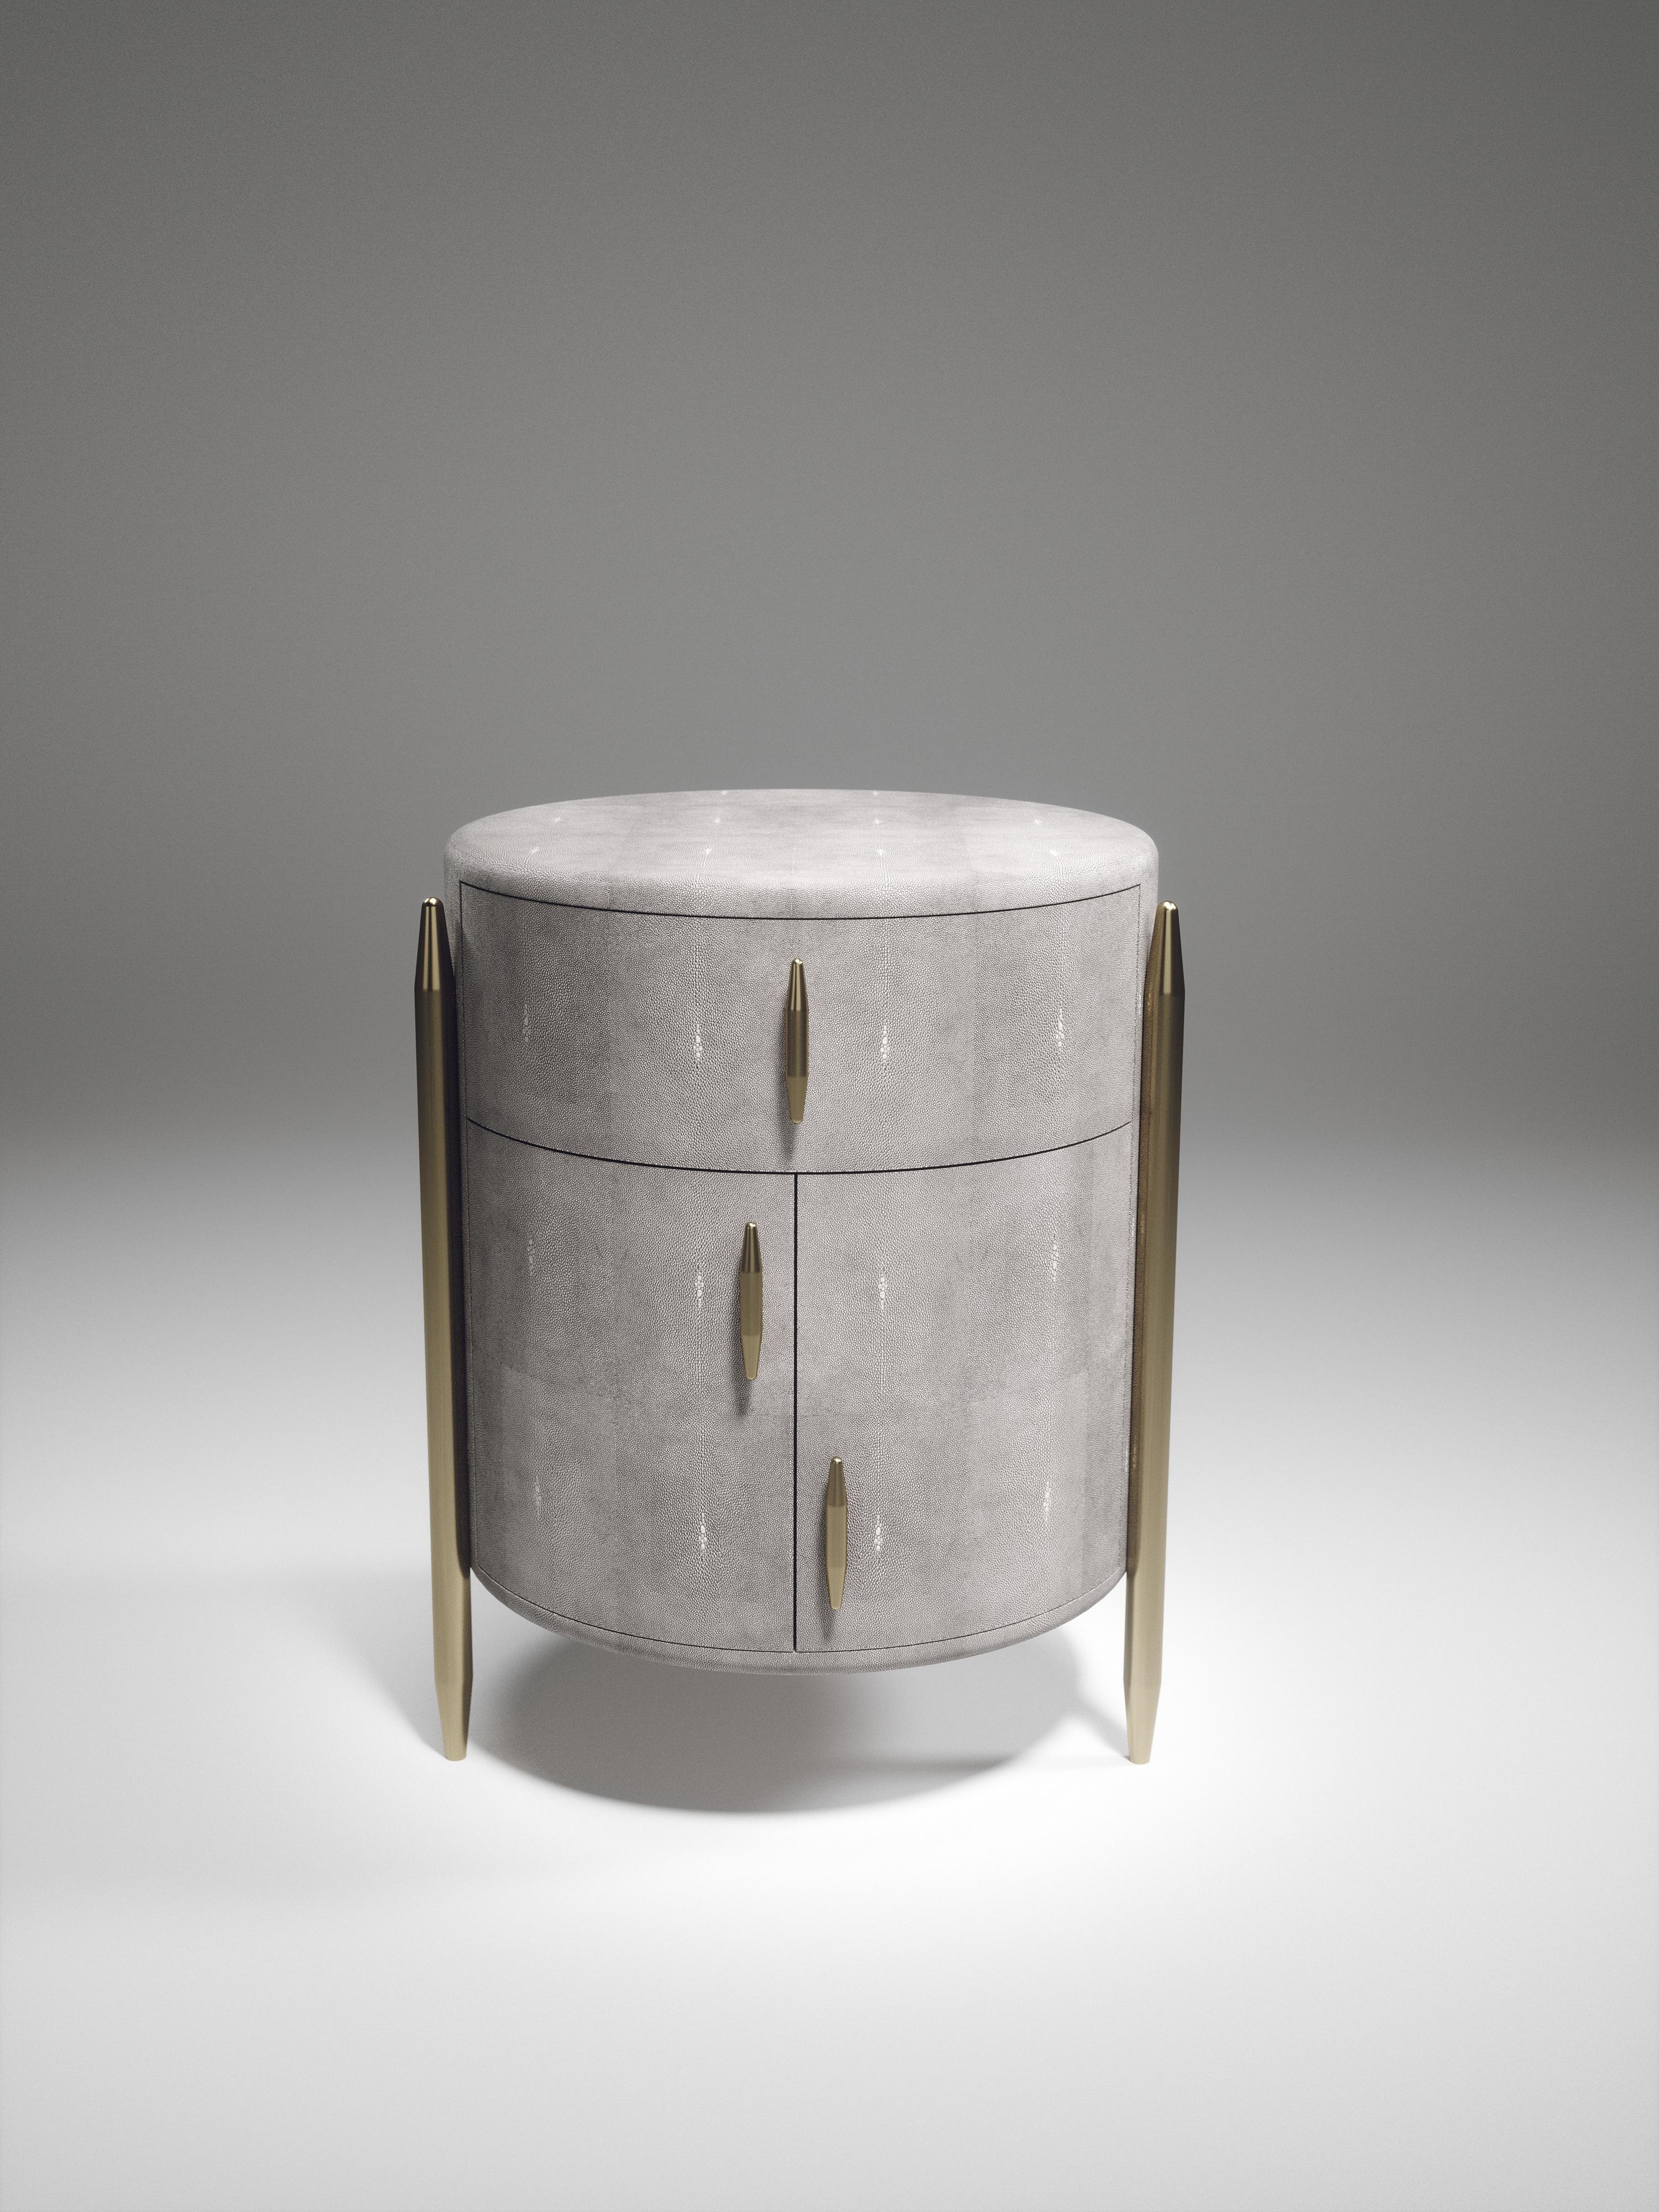 Brass Shagreen Night Stand with Polished Stainless Steel Accents by Kifu Paris For Sale